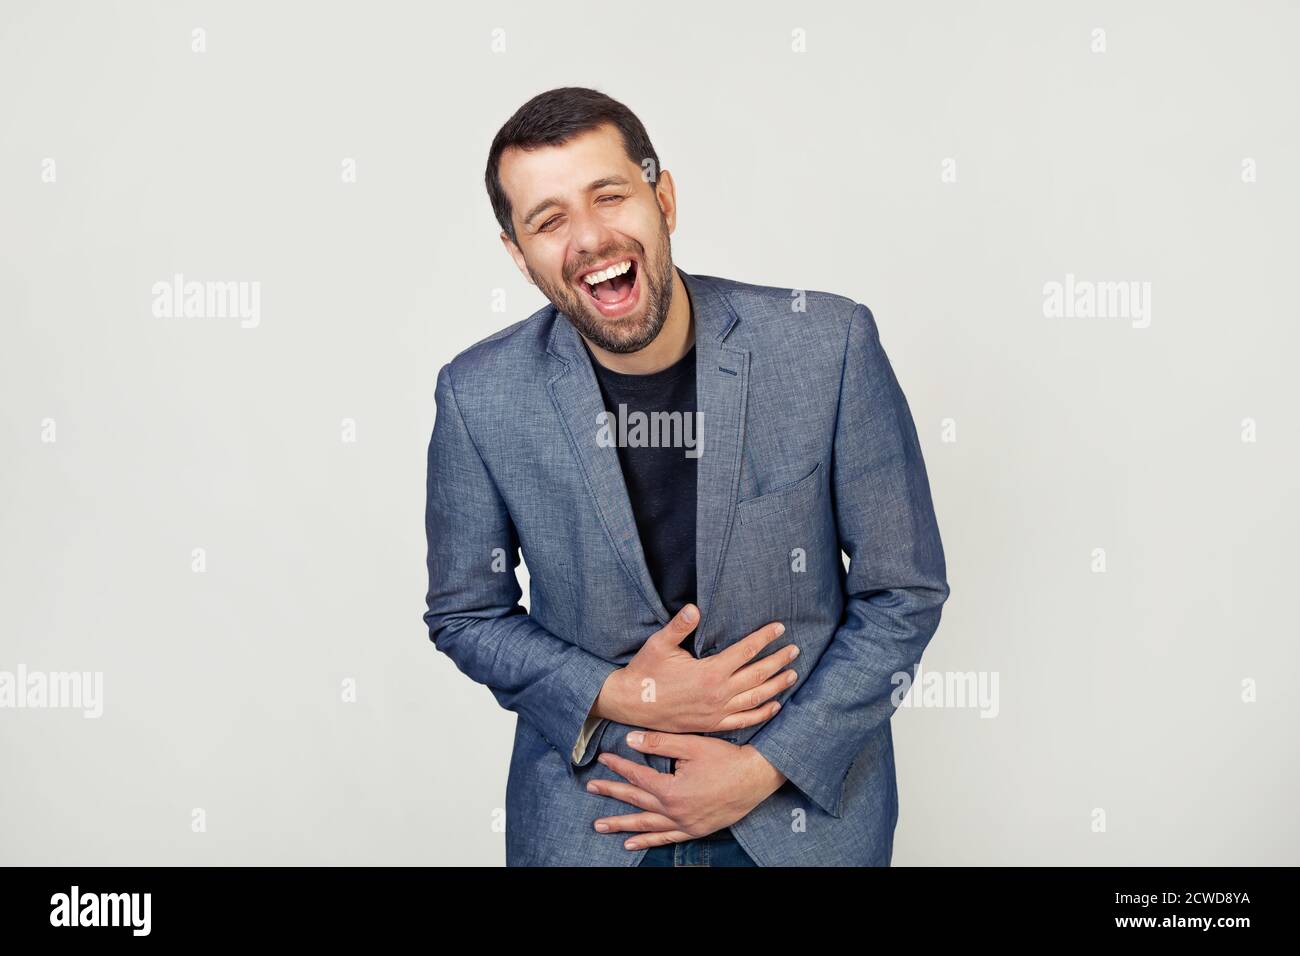 Young businessman man with a beard in a jacket smiling and laughing out loud because a funny crazy joke with hands on the body. Portrait of a man on a gray background. Stock Photo